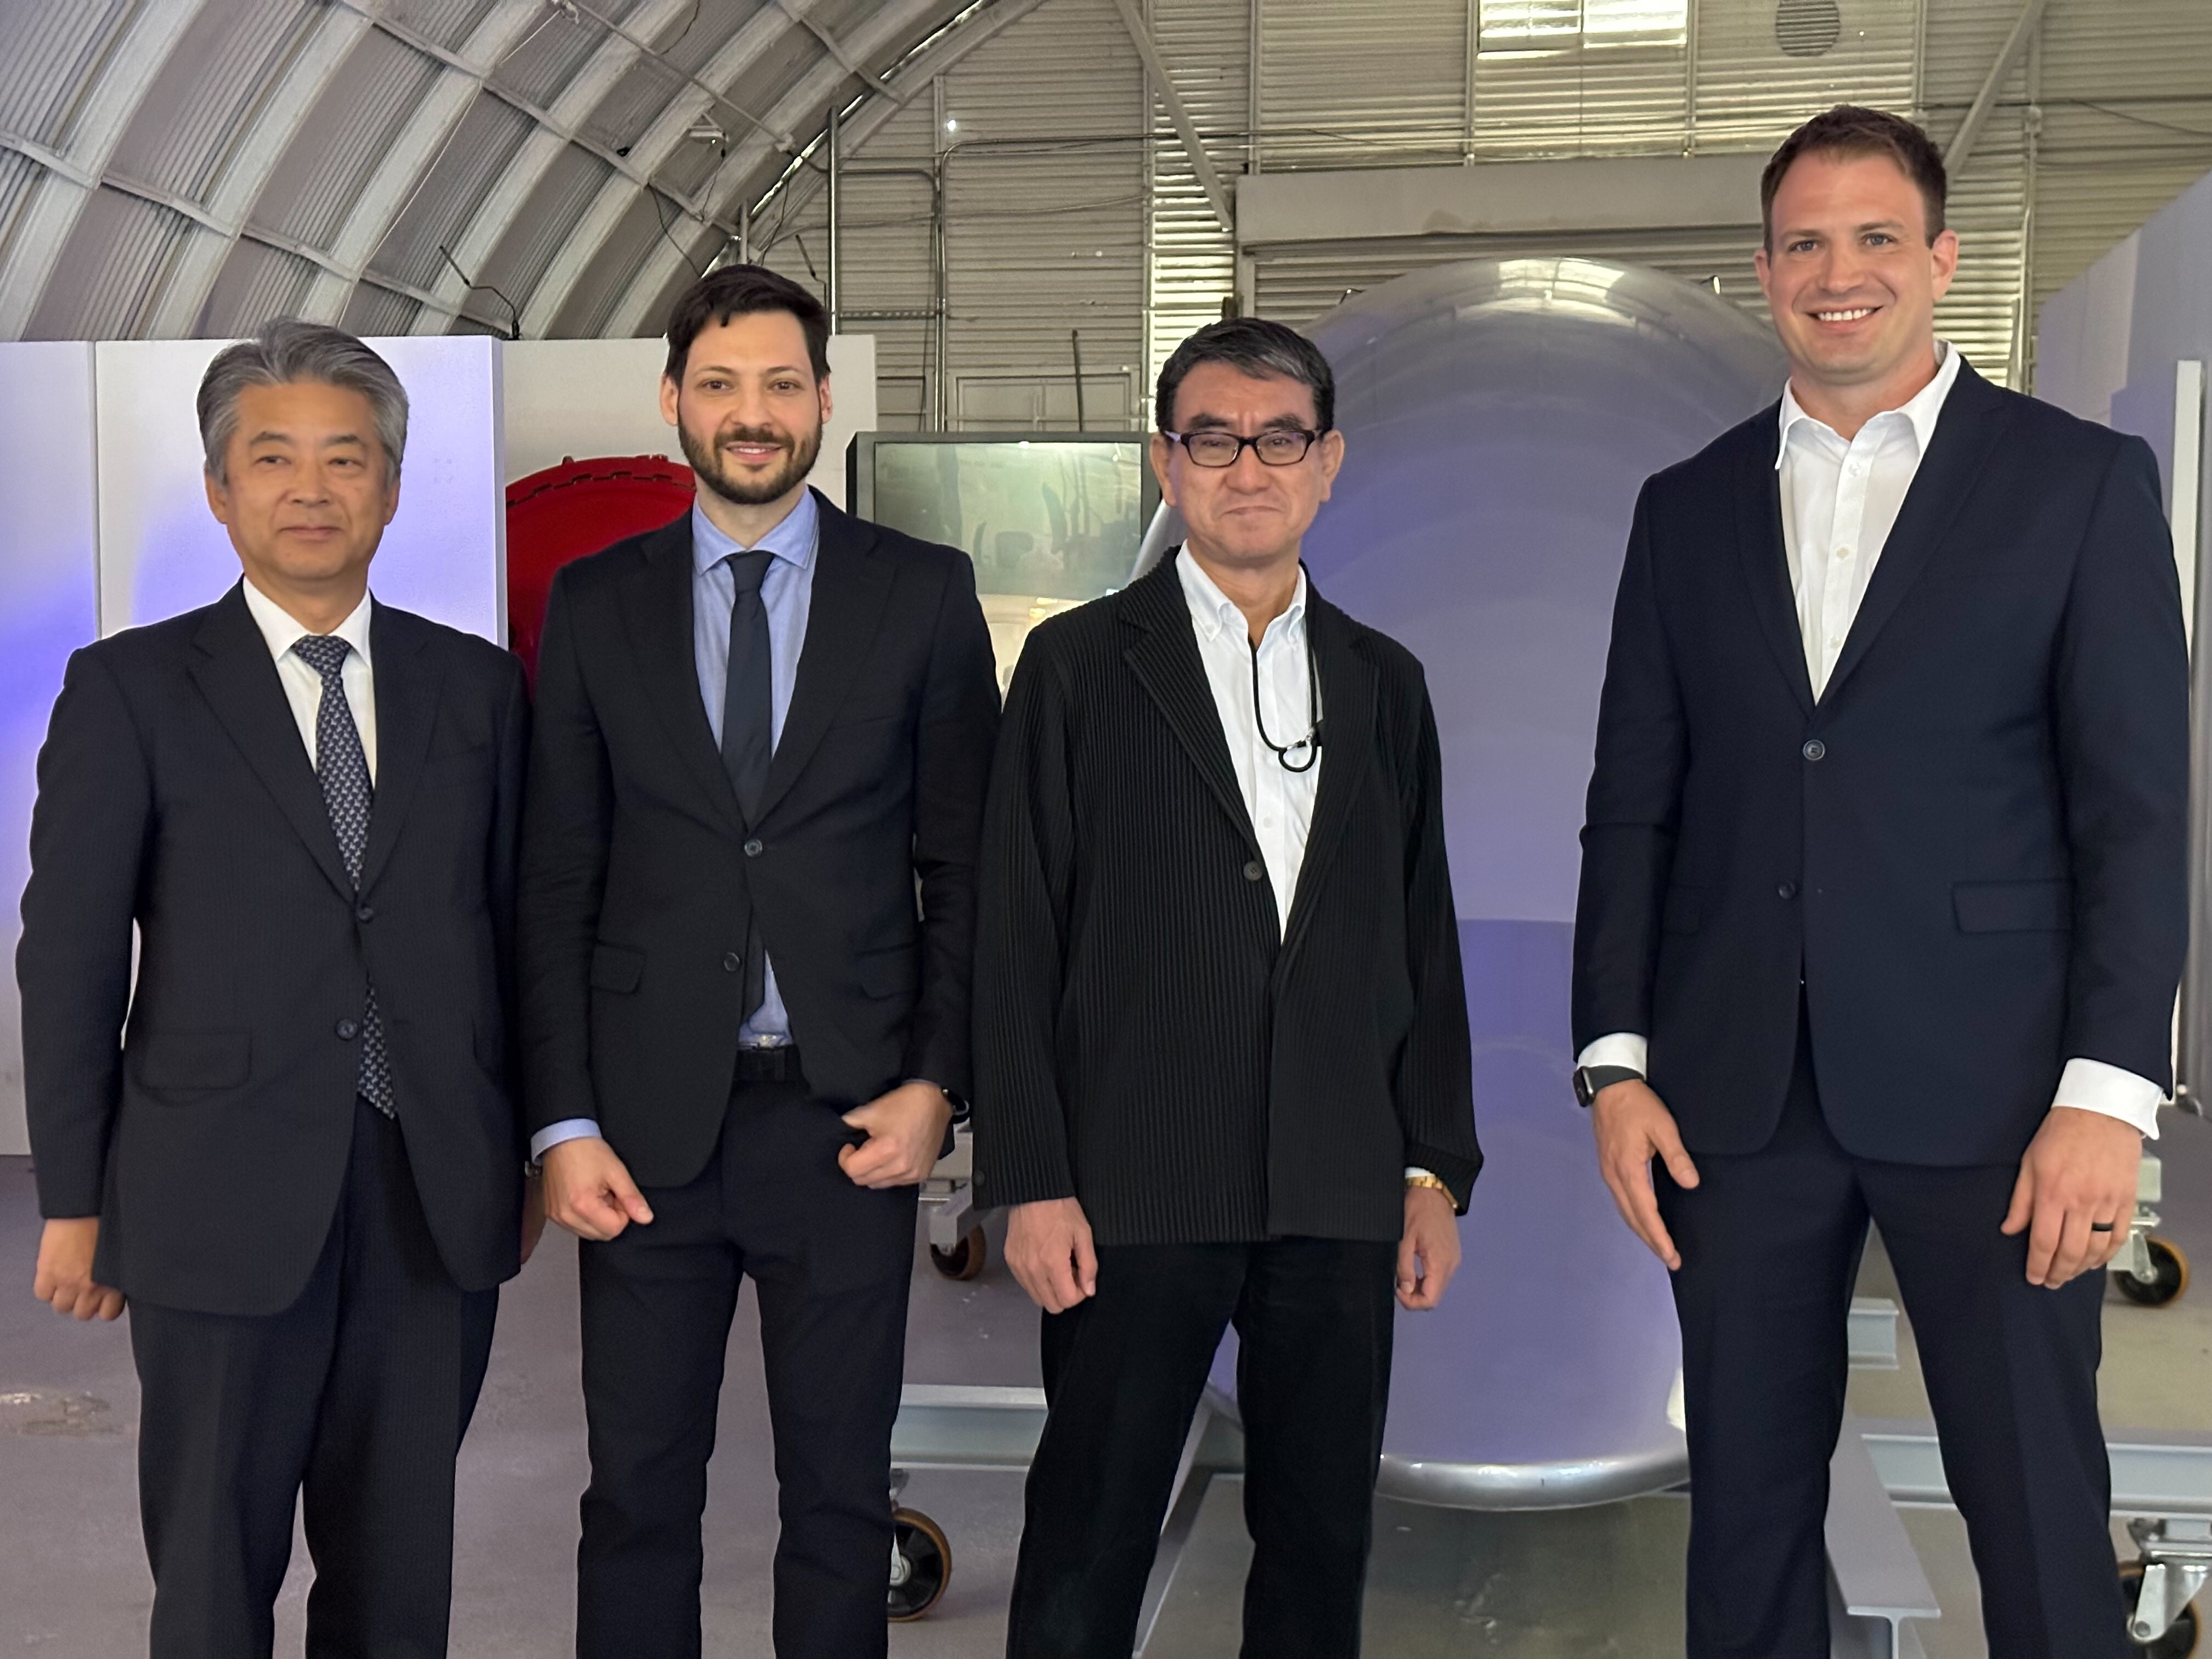 Minister Kono with employees of Hyperloop TT (a U.S. startup for rapid transit systems).